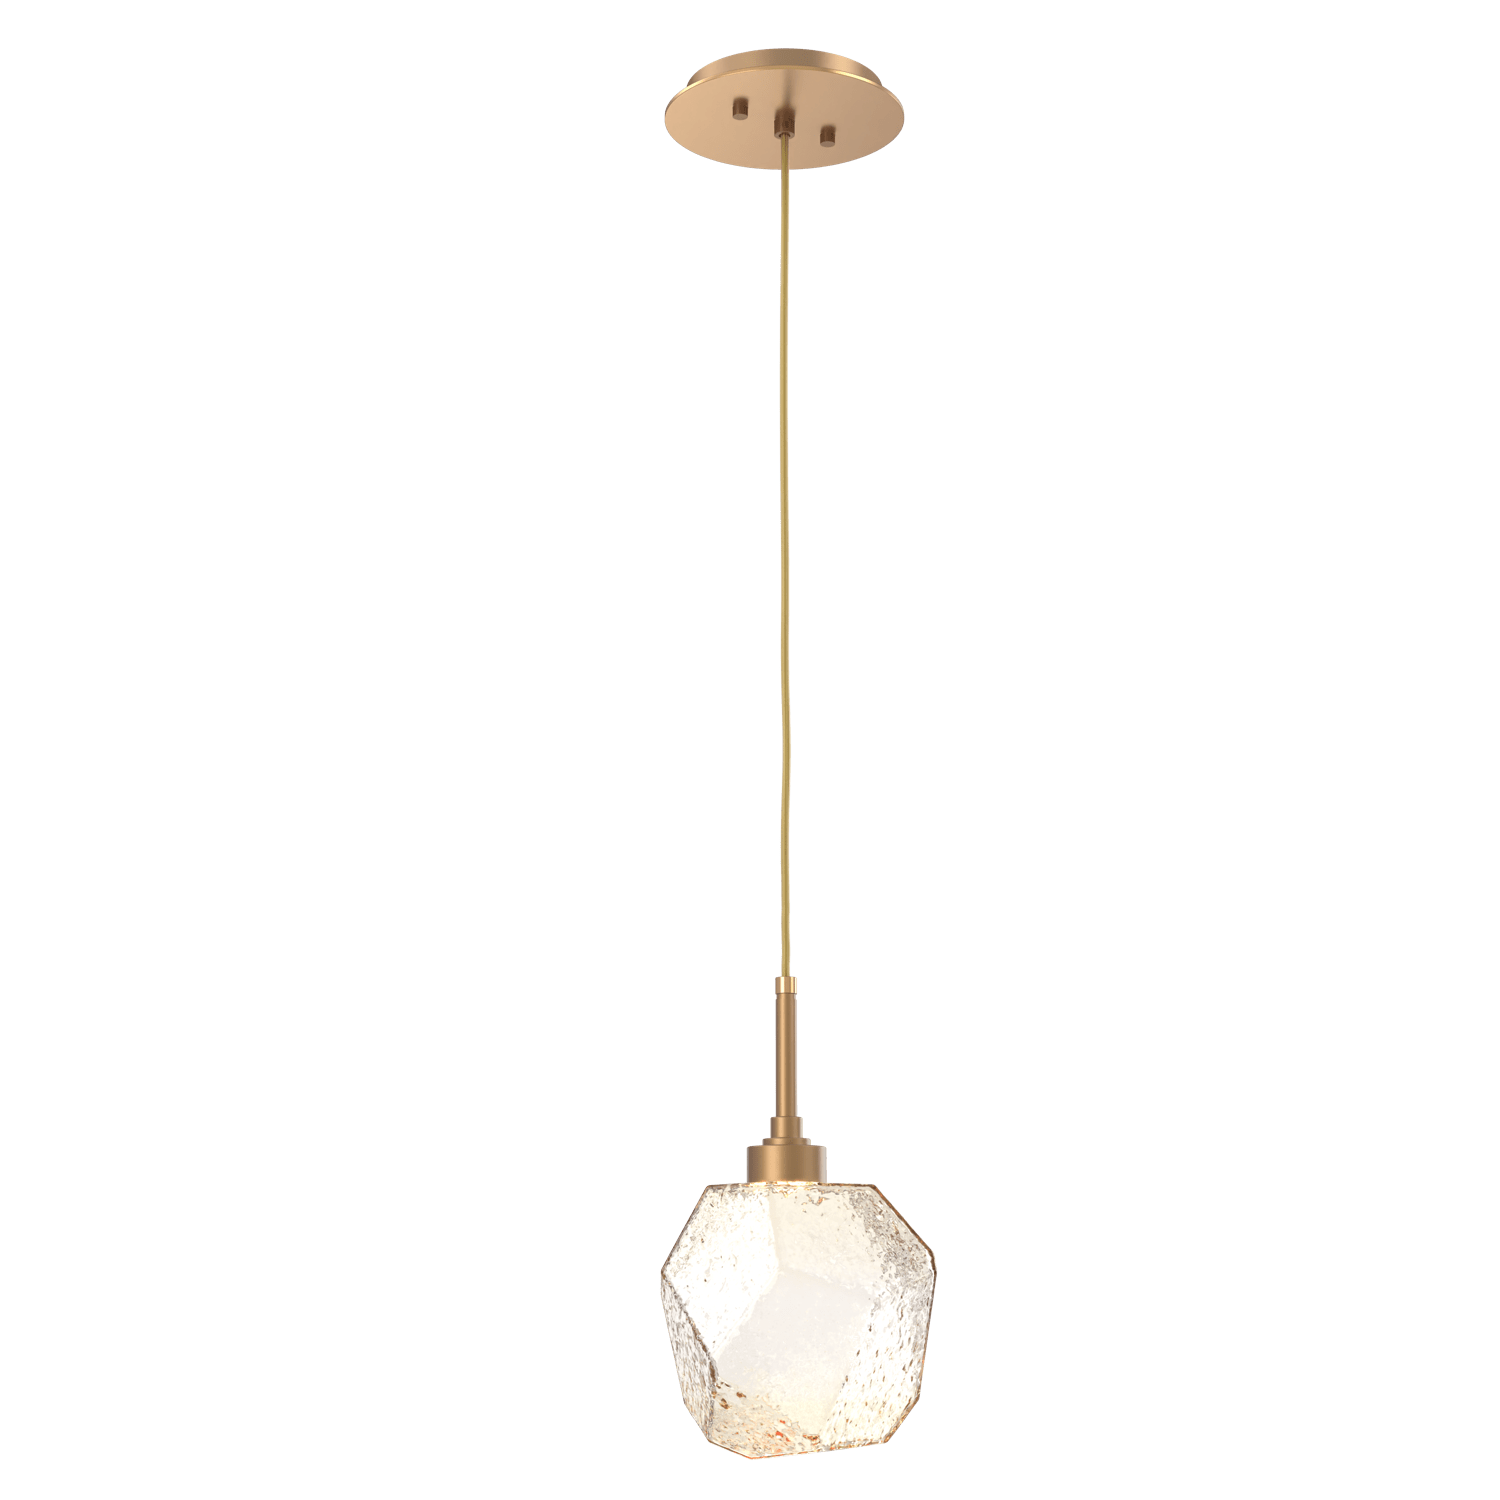 LAB0039-01-NB-A-Hammerton-Studio-Gem-pendant-light-with-novel-brass-finish-and-amber-blown-glass-shades-and-LED-lamping